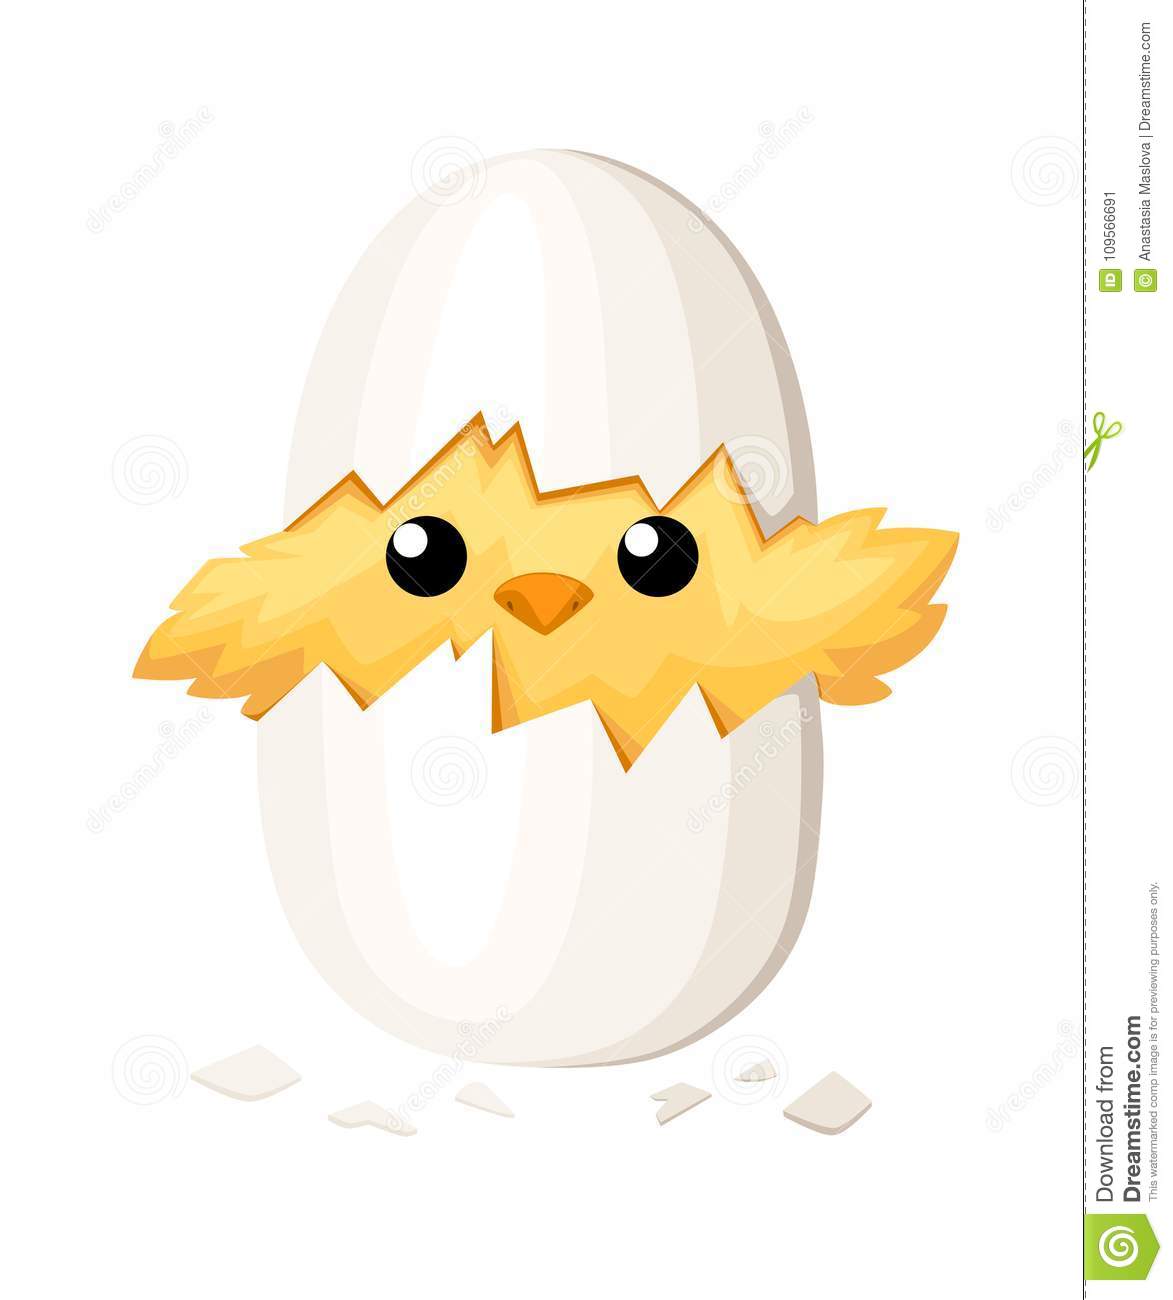 Funny Chicken In Egg For Easter Decoration Cartoon Flat Clipart.